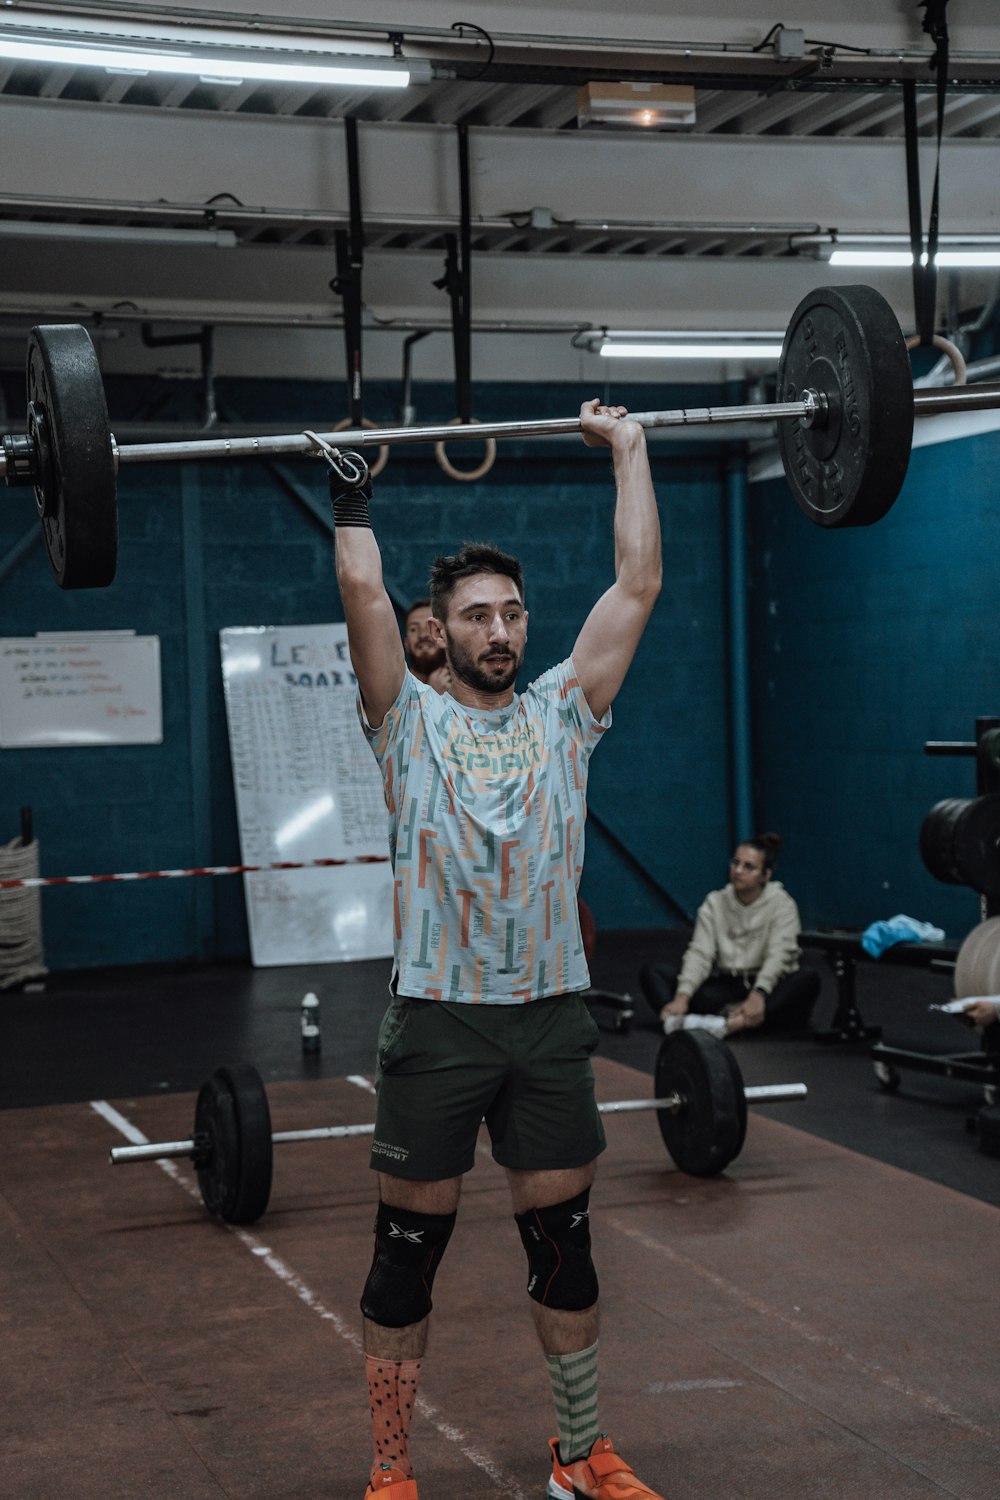 a man is lifting a barbell in a gym